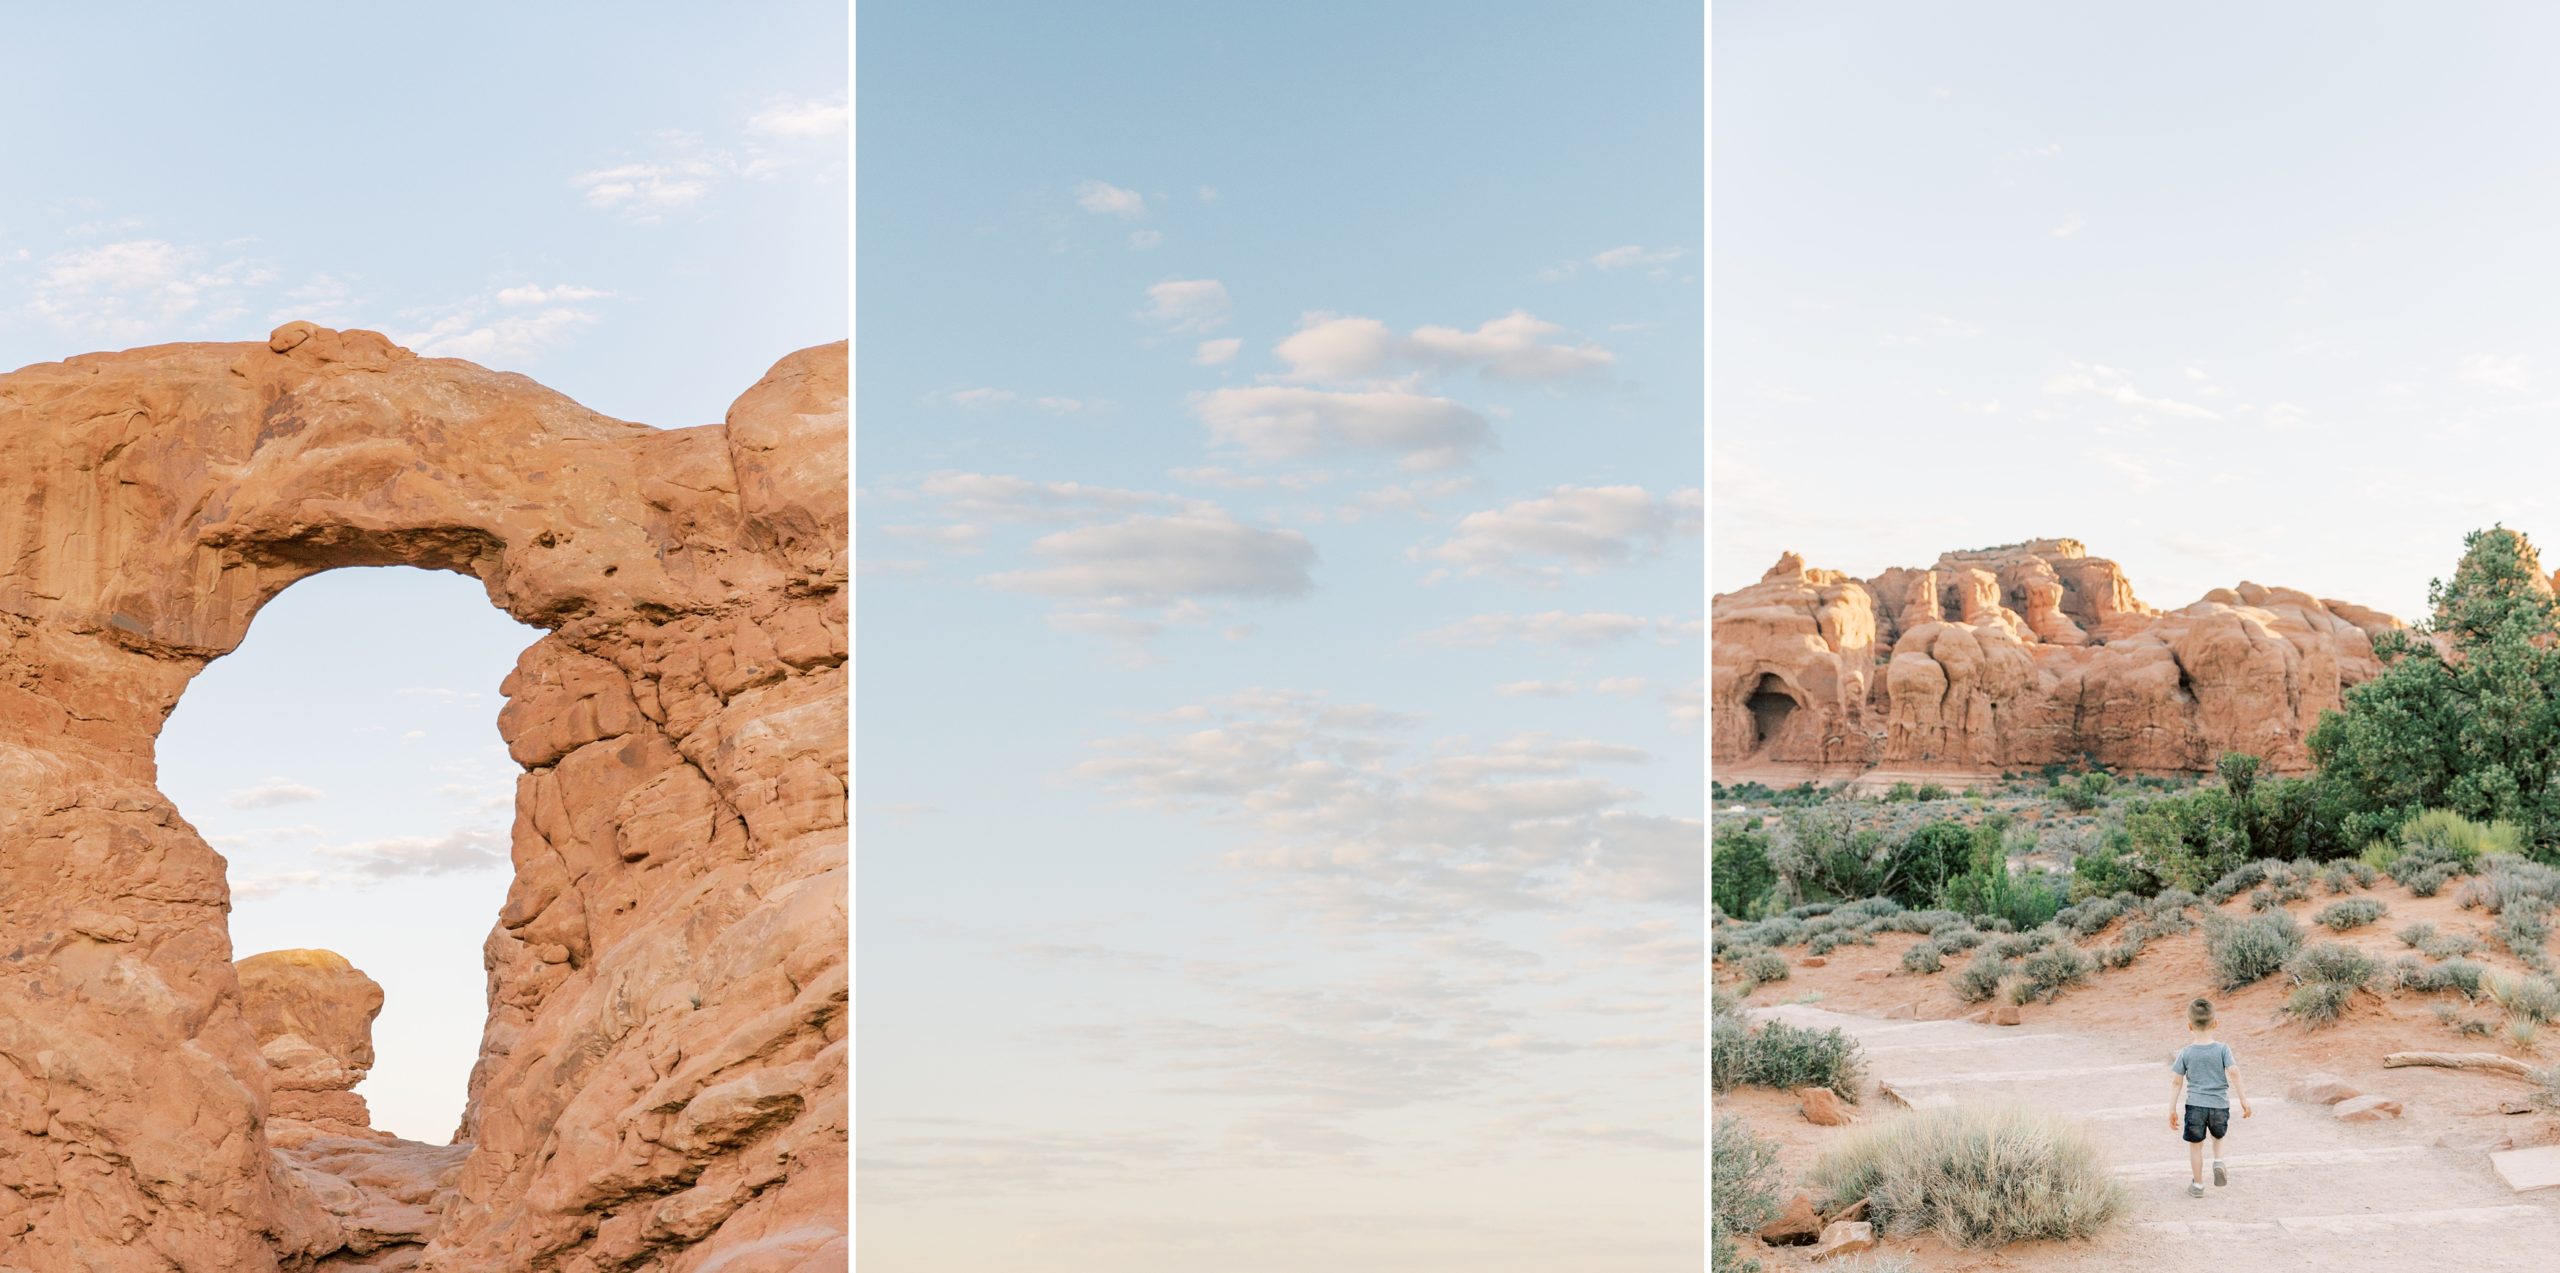 Summer vacation to Salt Lake City and Moab, Utah, to explore Canyonlands and Arches National Parks.